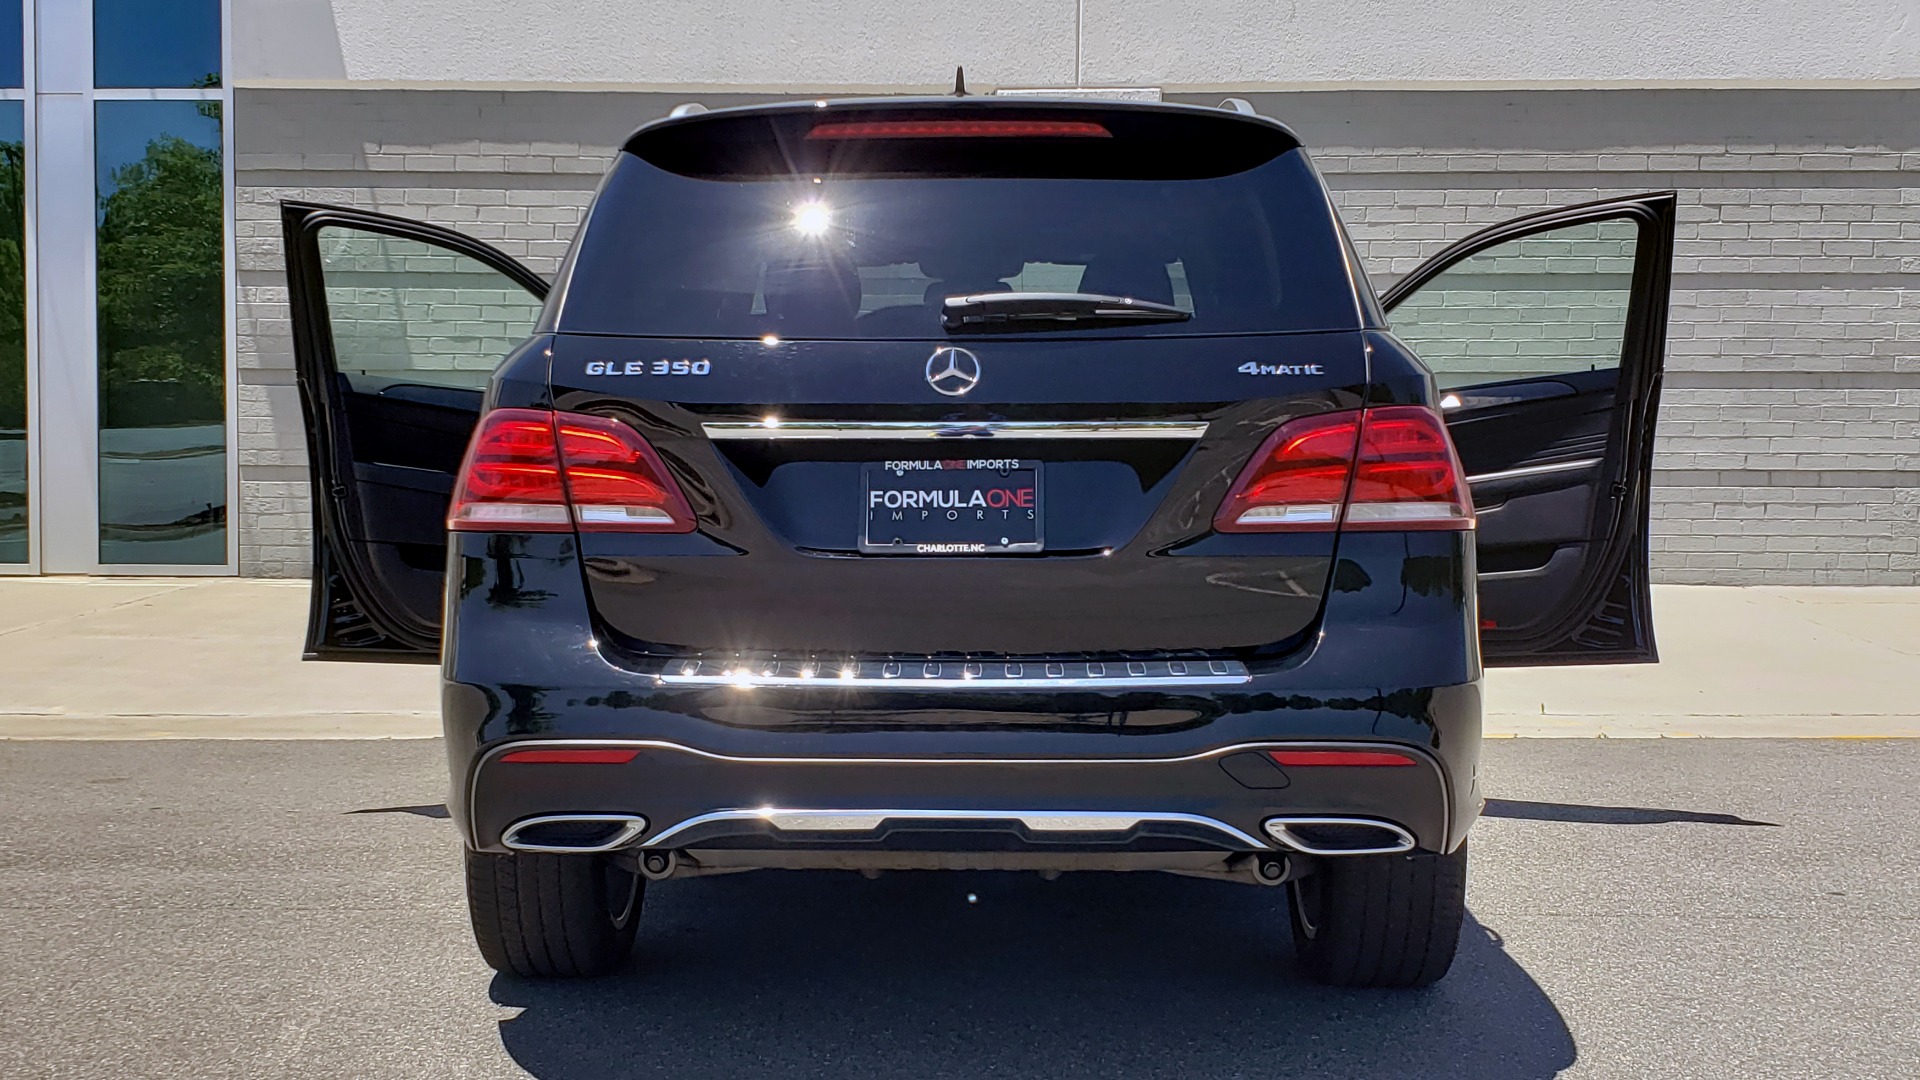 Used 2018 Mercedes-Benz GLE 350 4MATIC PREMIUM / NAV / AMG LINE INT / H/K SND / SUNROOF / REARVIEW for sale Sold at Formula Imports in Charlotte NC 28227 30